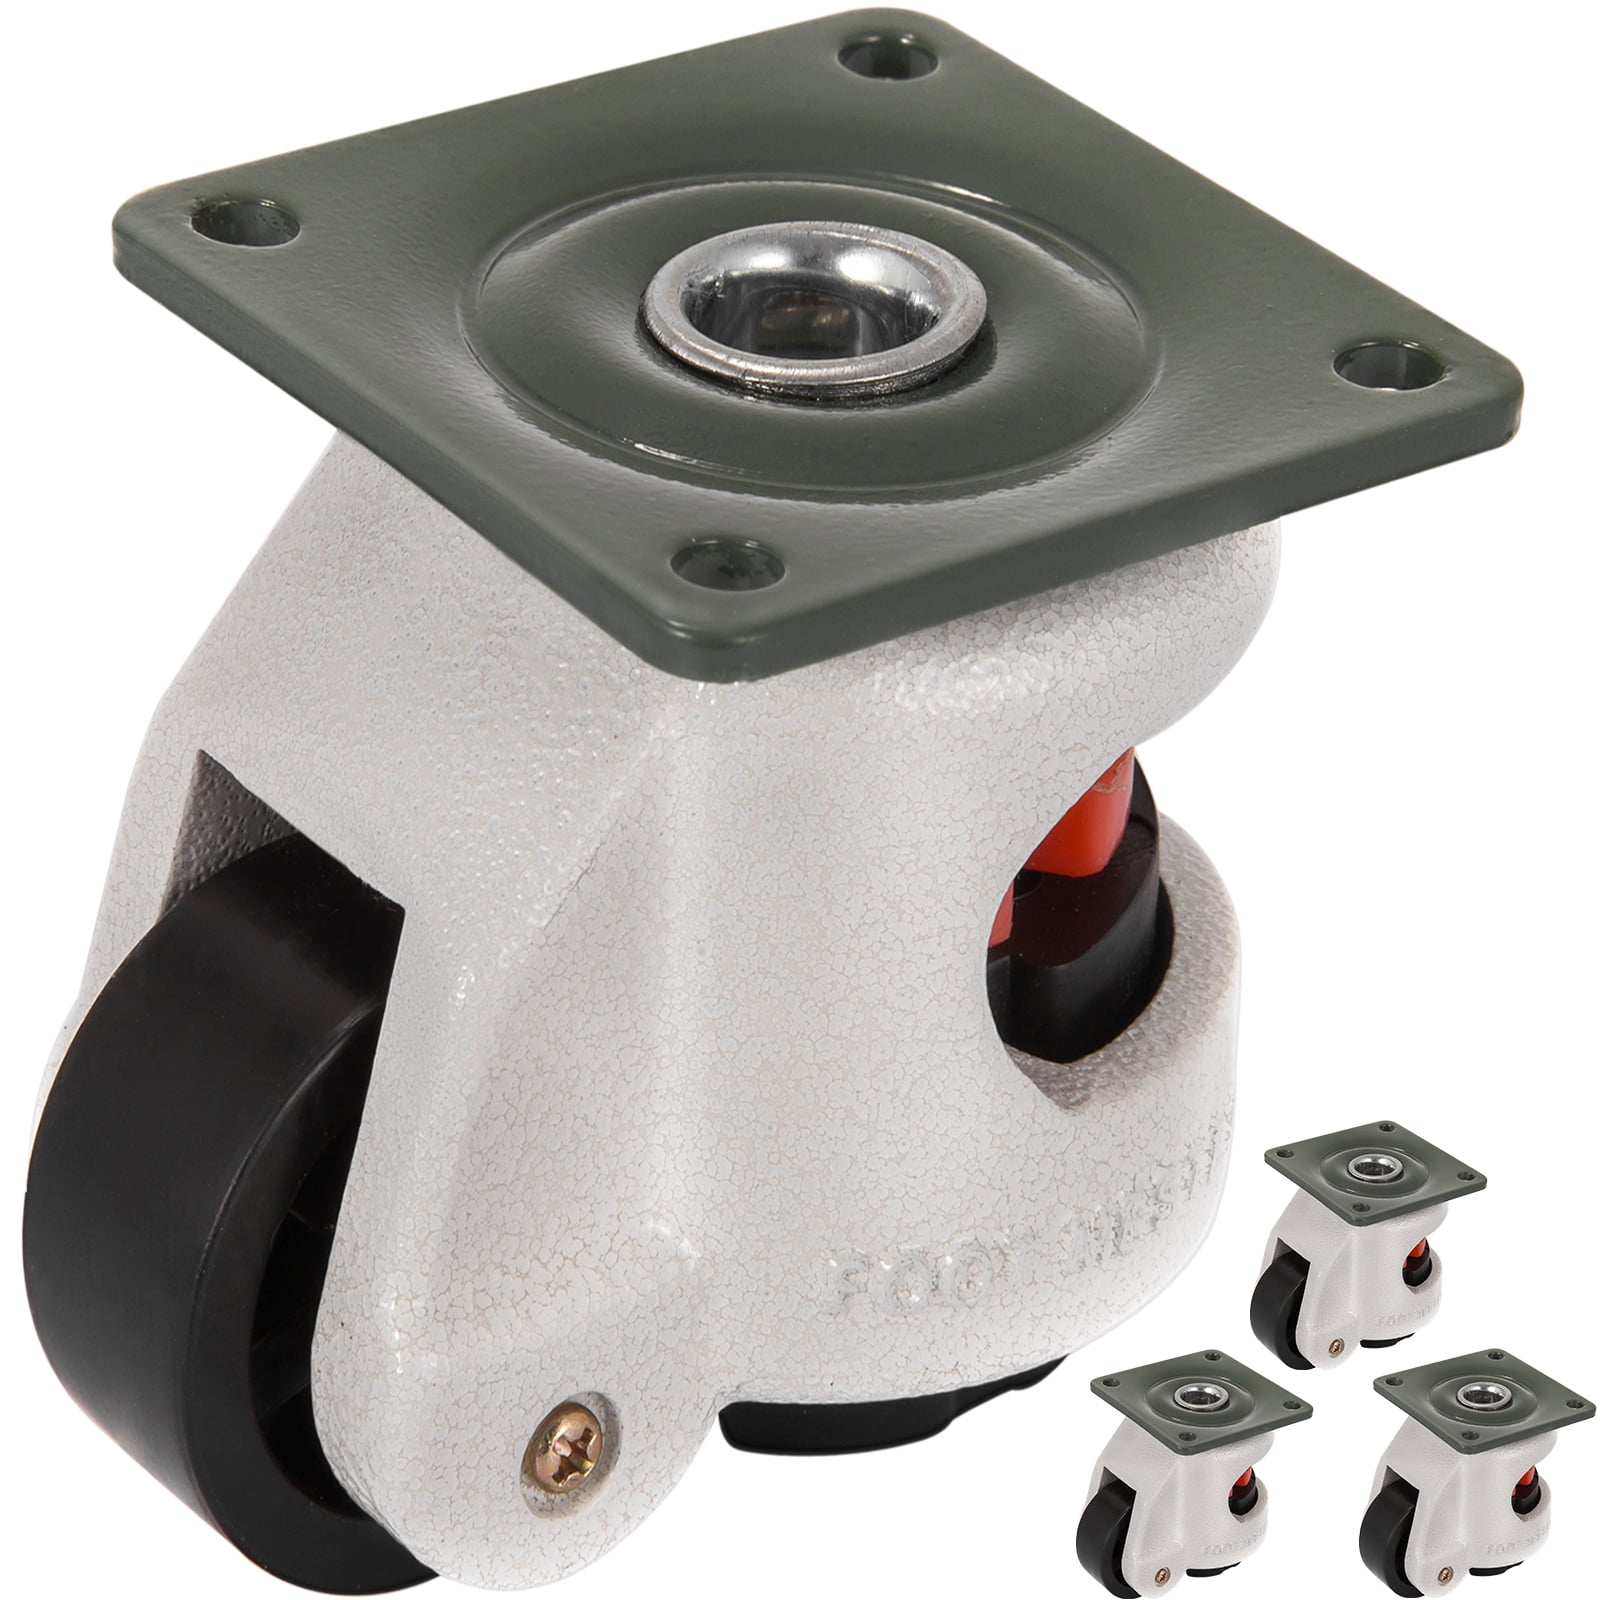 Plate Casters Retractable Casters Model 40f Leveling Wheels For